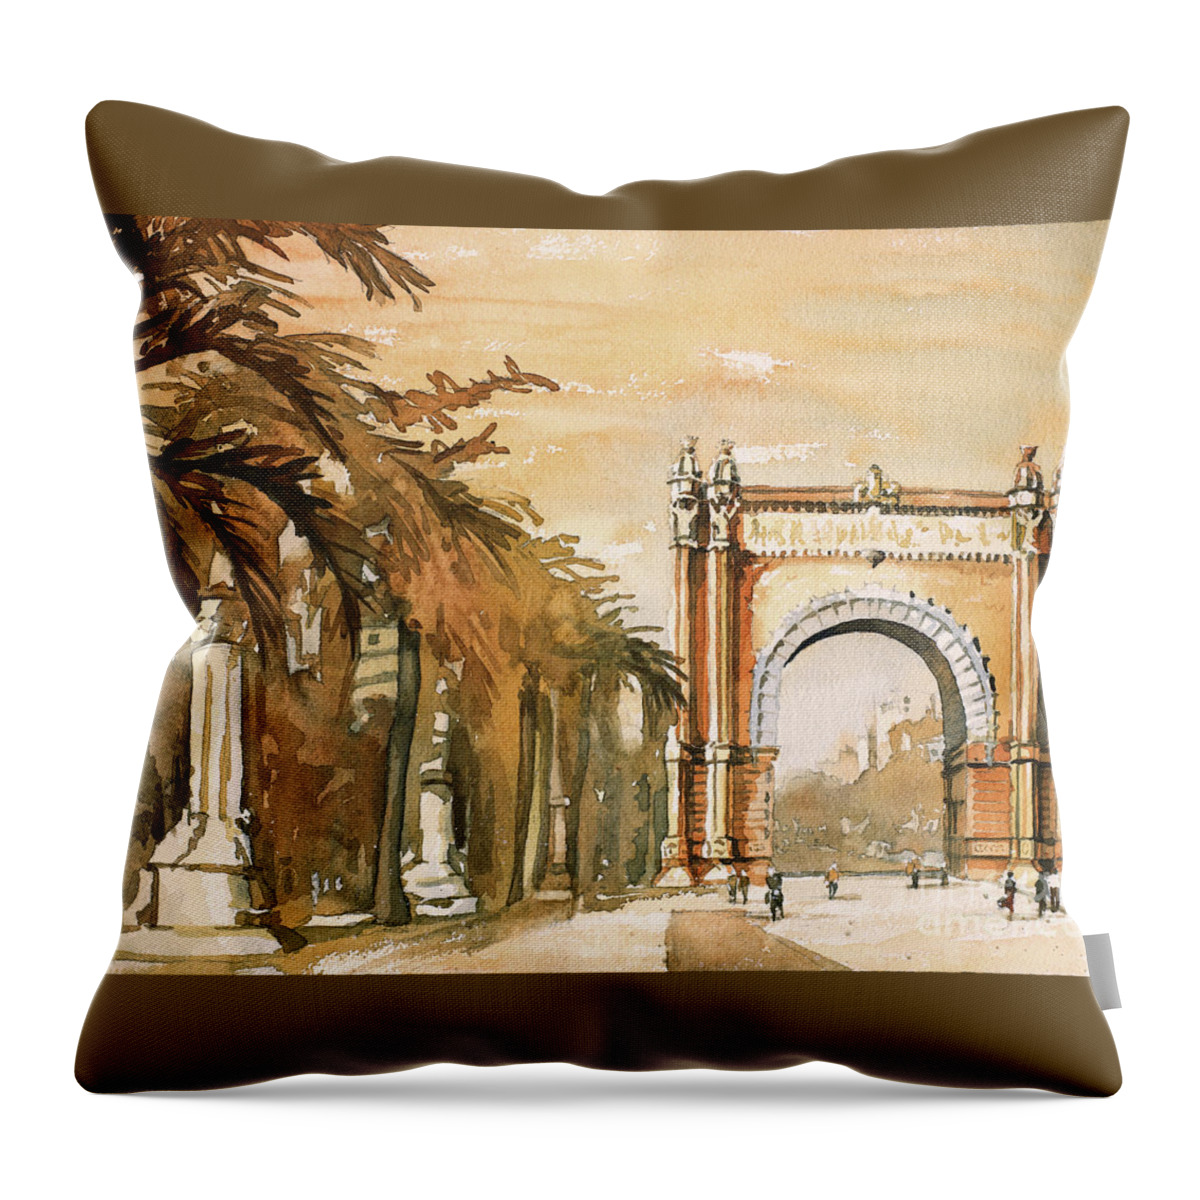 Street Scene Throw Pillow featuring the painting Arch- Barcelona, Spain by Ryan Fox